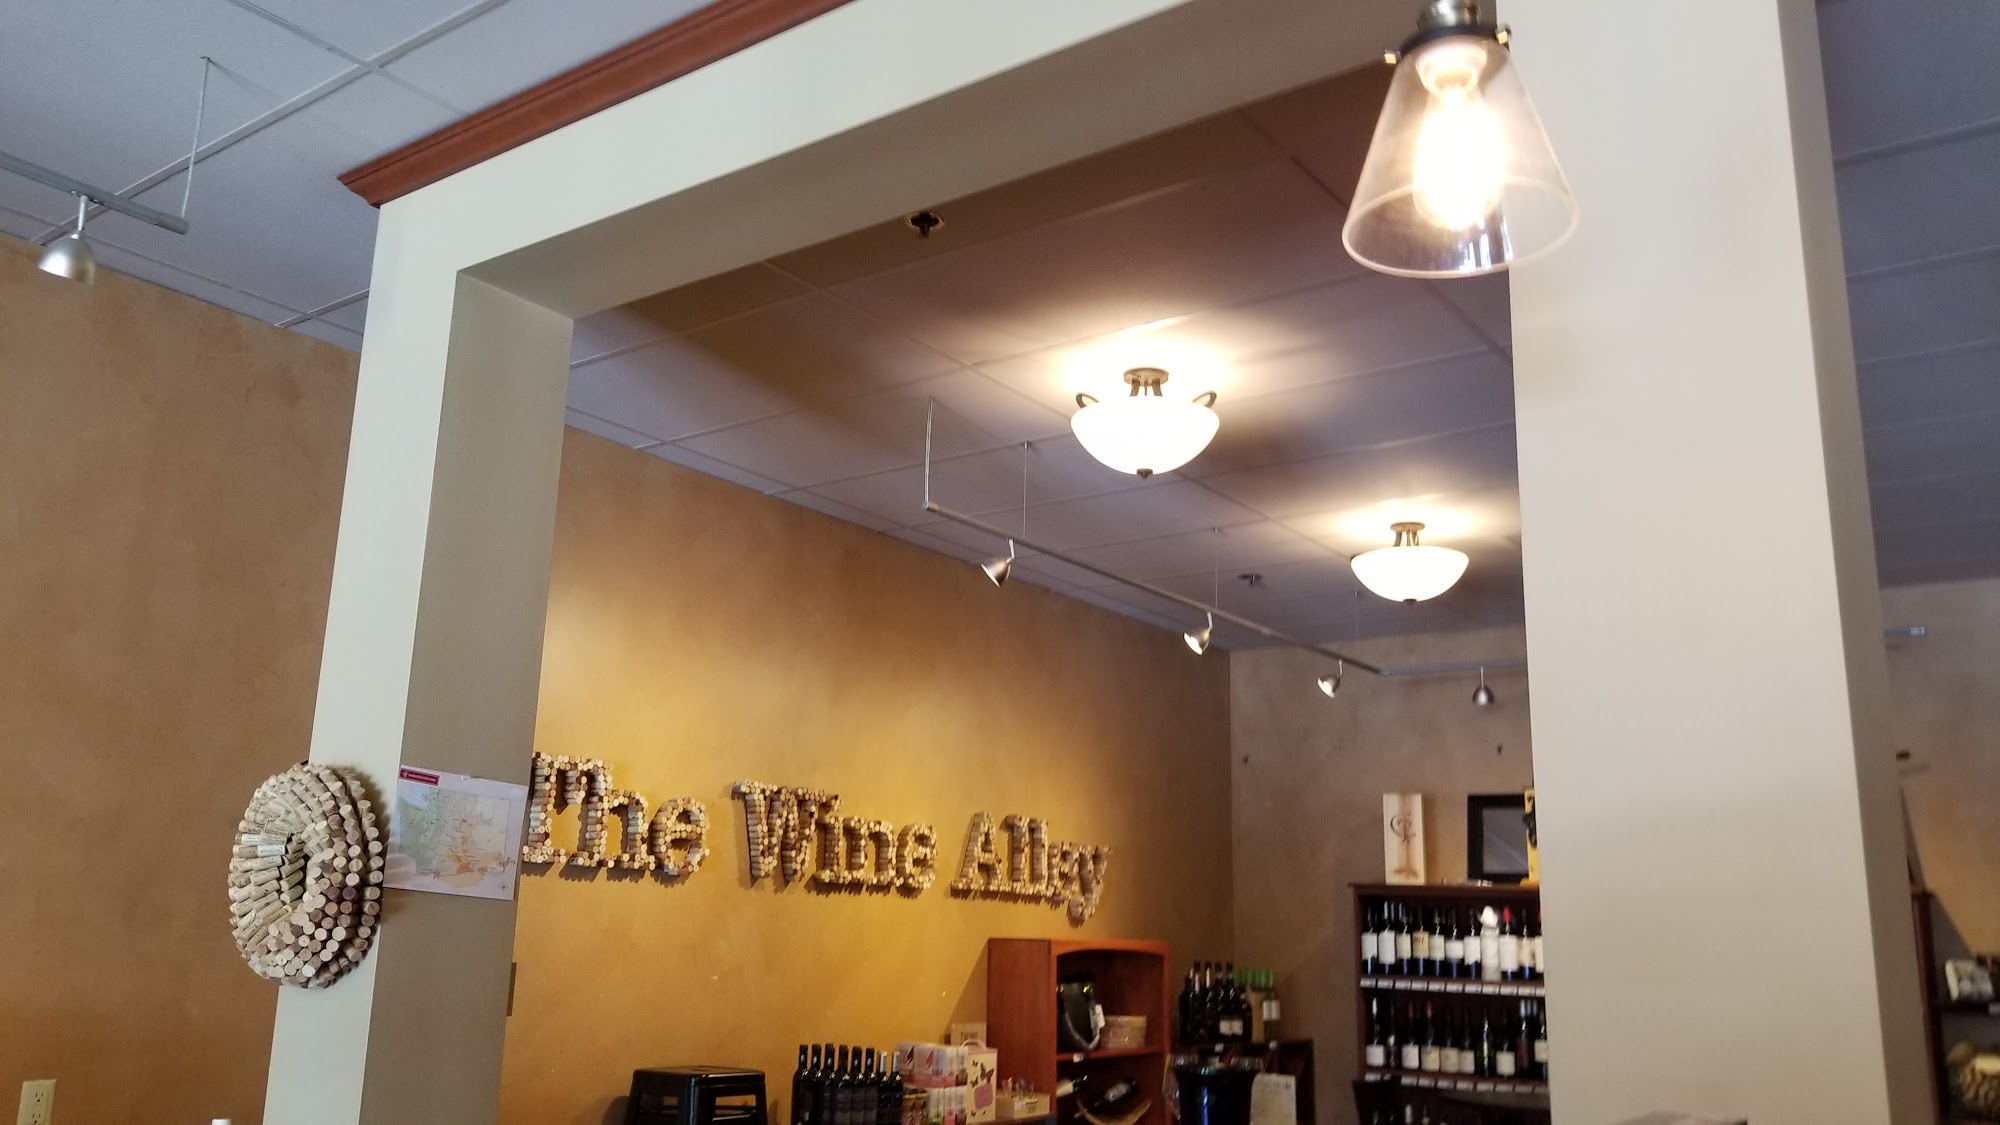 The Wine Alley